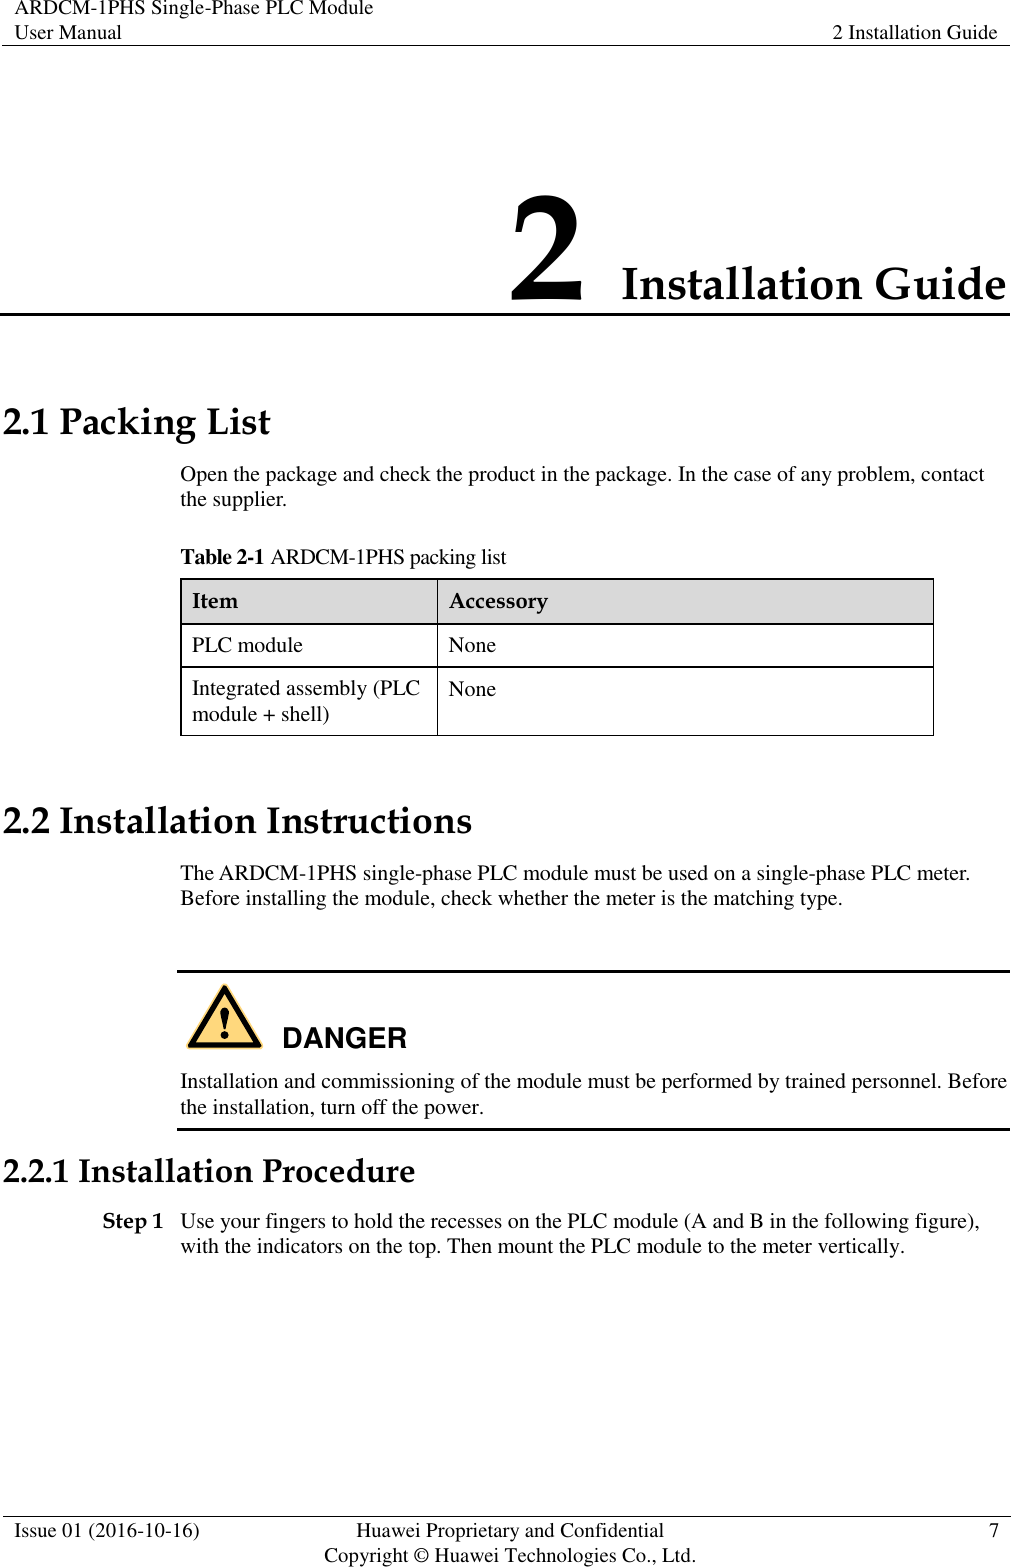 ARDCM-1PHS Single-Phase PLC Module User Manual 2 Installation Guide  Issue 01 (2016-10-16) Huawei Proprietary and Confidential Copyright © Huawei Technologies Co., Ltd. 7  2 Installation Guide 2.1 Packing List Open the package and check the product in the package. In the case of any problem, contact the supplier. Table 2-1 ARDCM-1PHS packing list Item Accessory PLC module None Integrated assembly (PLC module + shell) None 2.2 Installation Instructions The ARDCM-1PHS single-phase PLC module must be used on a single-phase PLC meter. Before installing the module, check whether the meter is the matching type.   Installation and commissioning of the module must be performed by trained personnel. Before the installation, turn off the power. 2.2.1 Installation Procedure Step 1 Use your fingers to hold the recesses on the PLC module (A and B in the following figure), with the indicators on the top. Then mount the PLC module to the meter vertically. DANGER